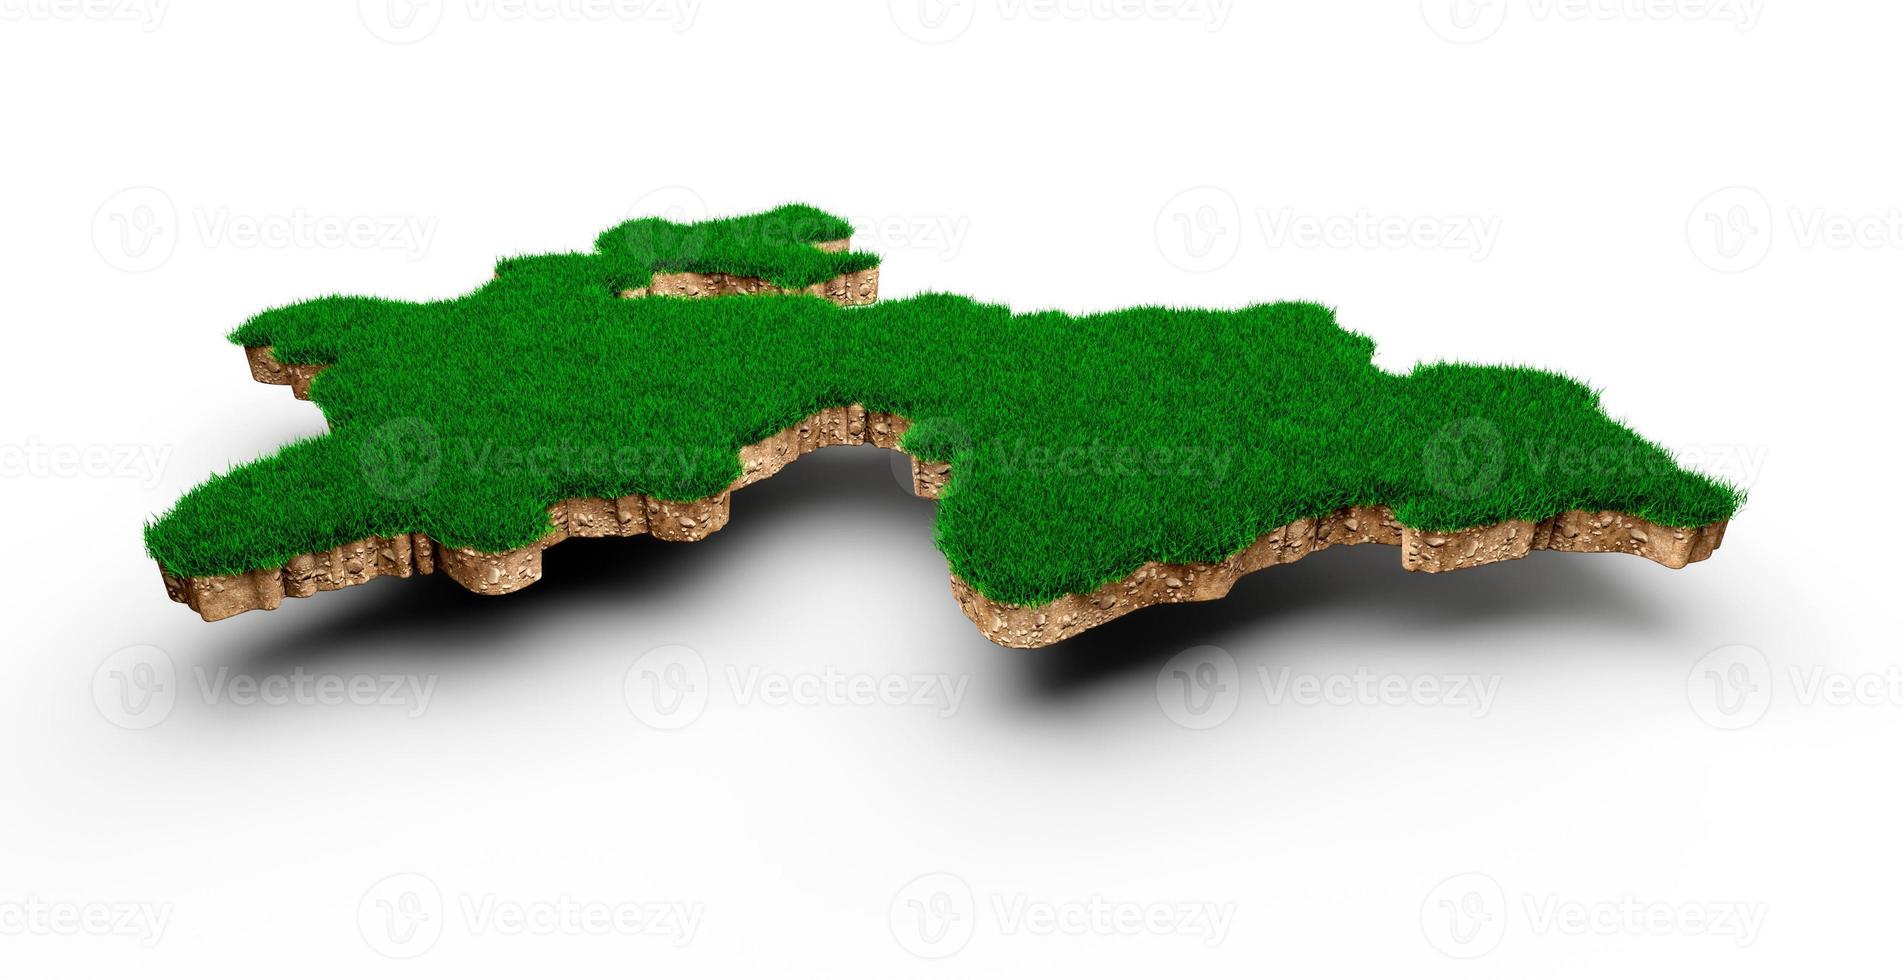 Tajikistan Map soil land geology cross section with green grass and Rock ground texture 3d illustration photo